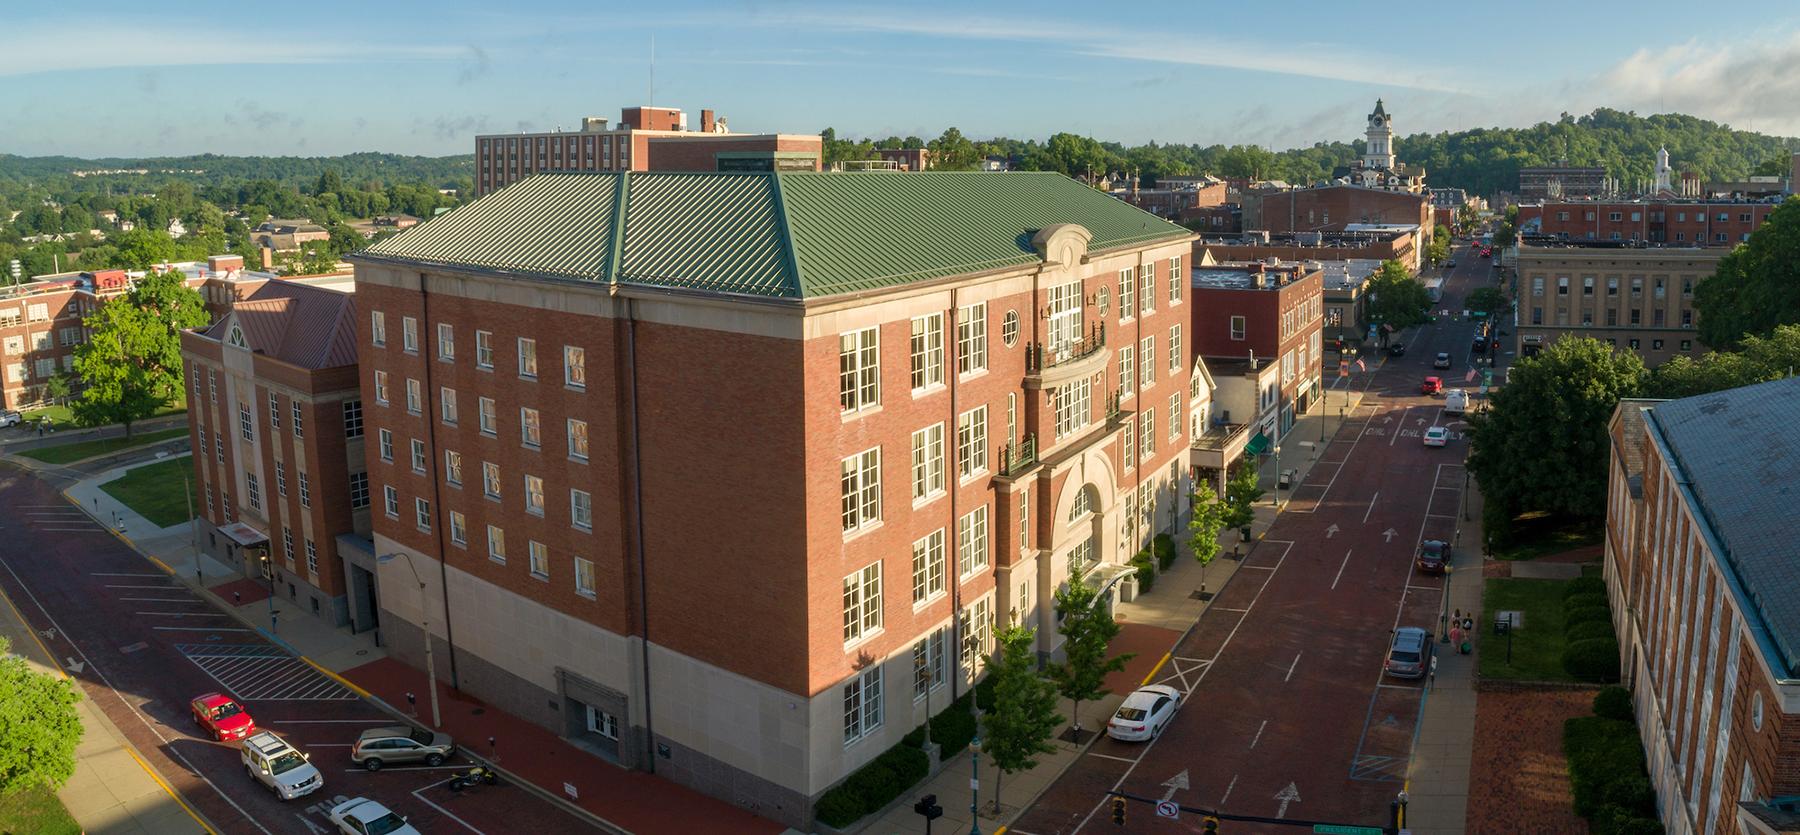 Aerial view of Copeland Hall, home of Ohio University's College of Business